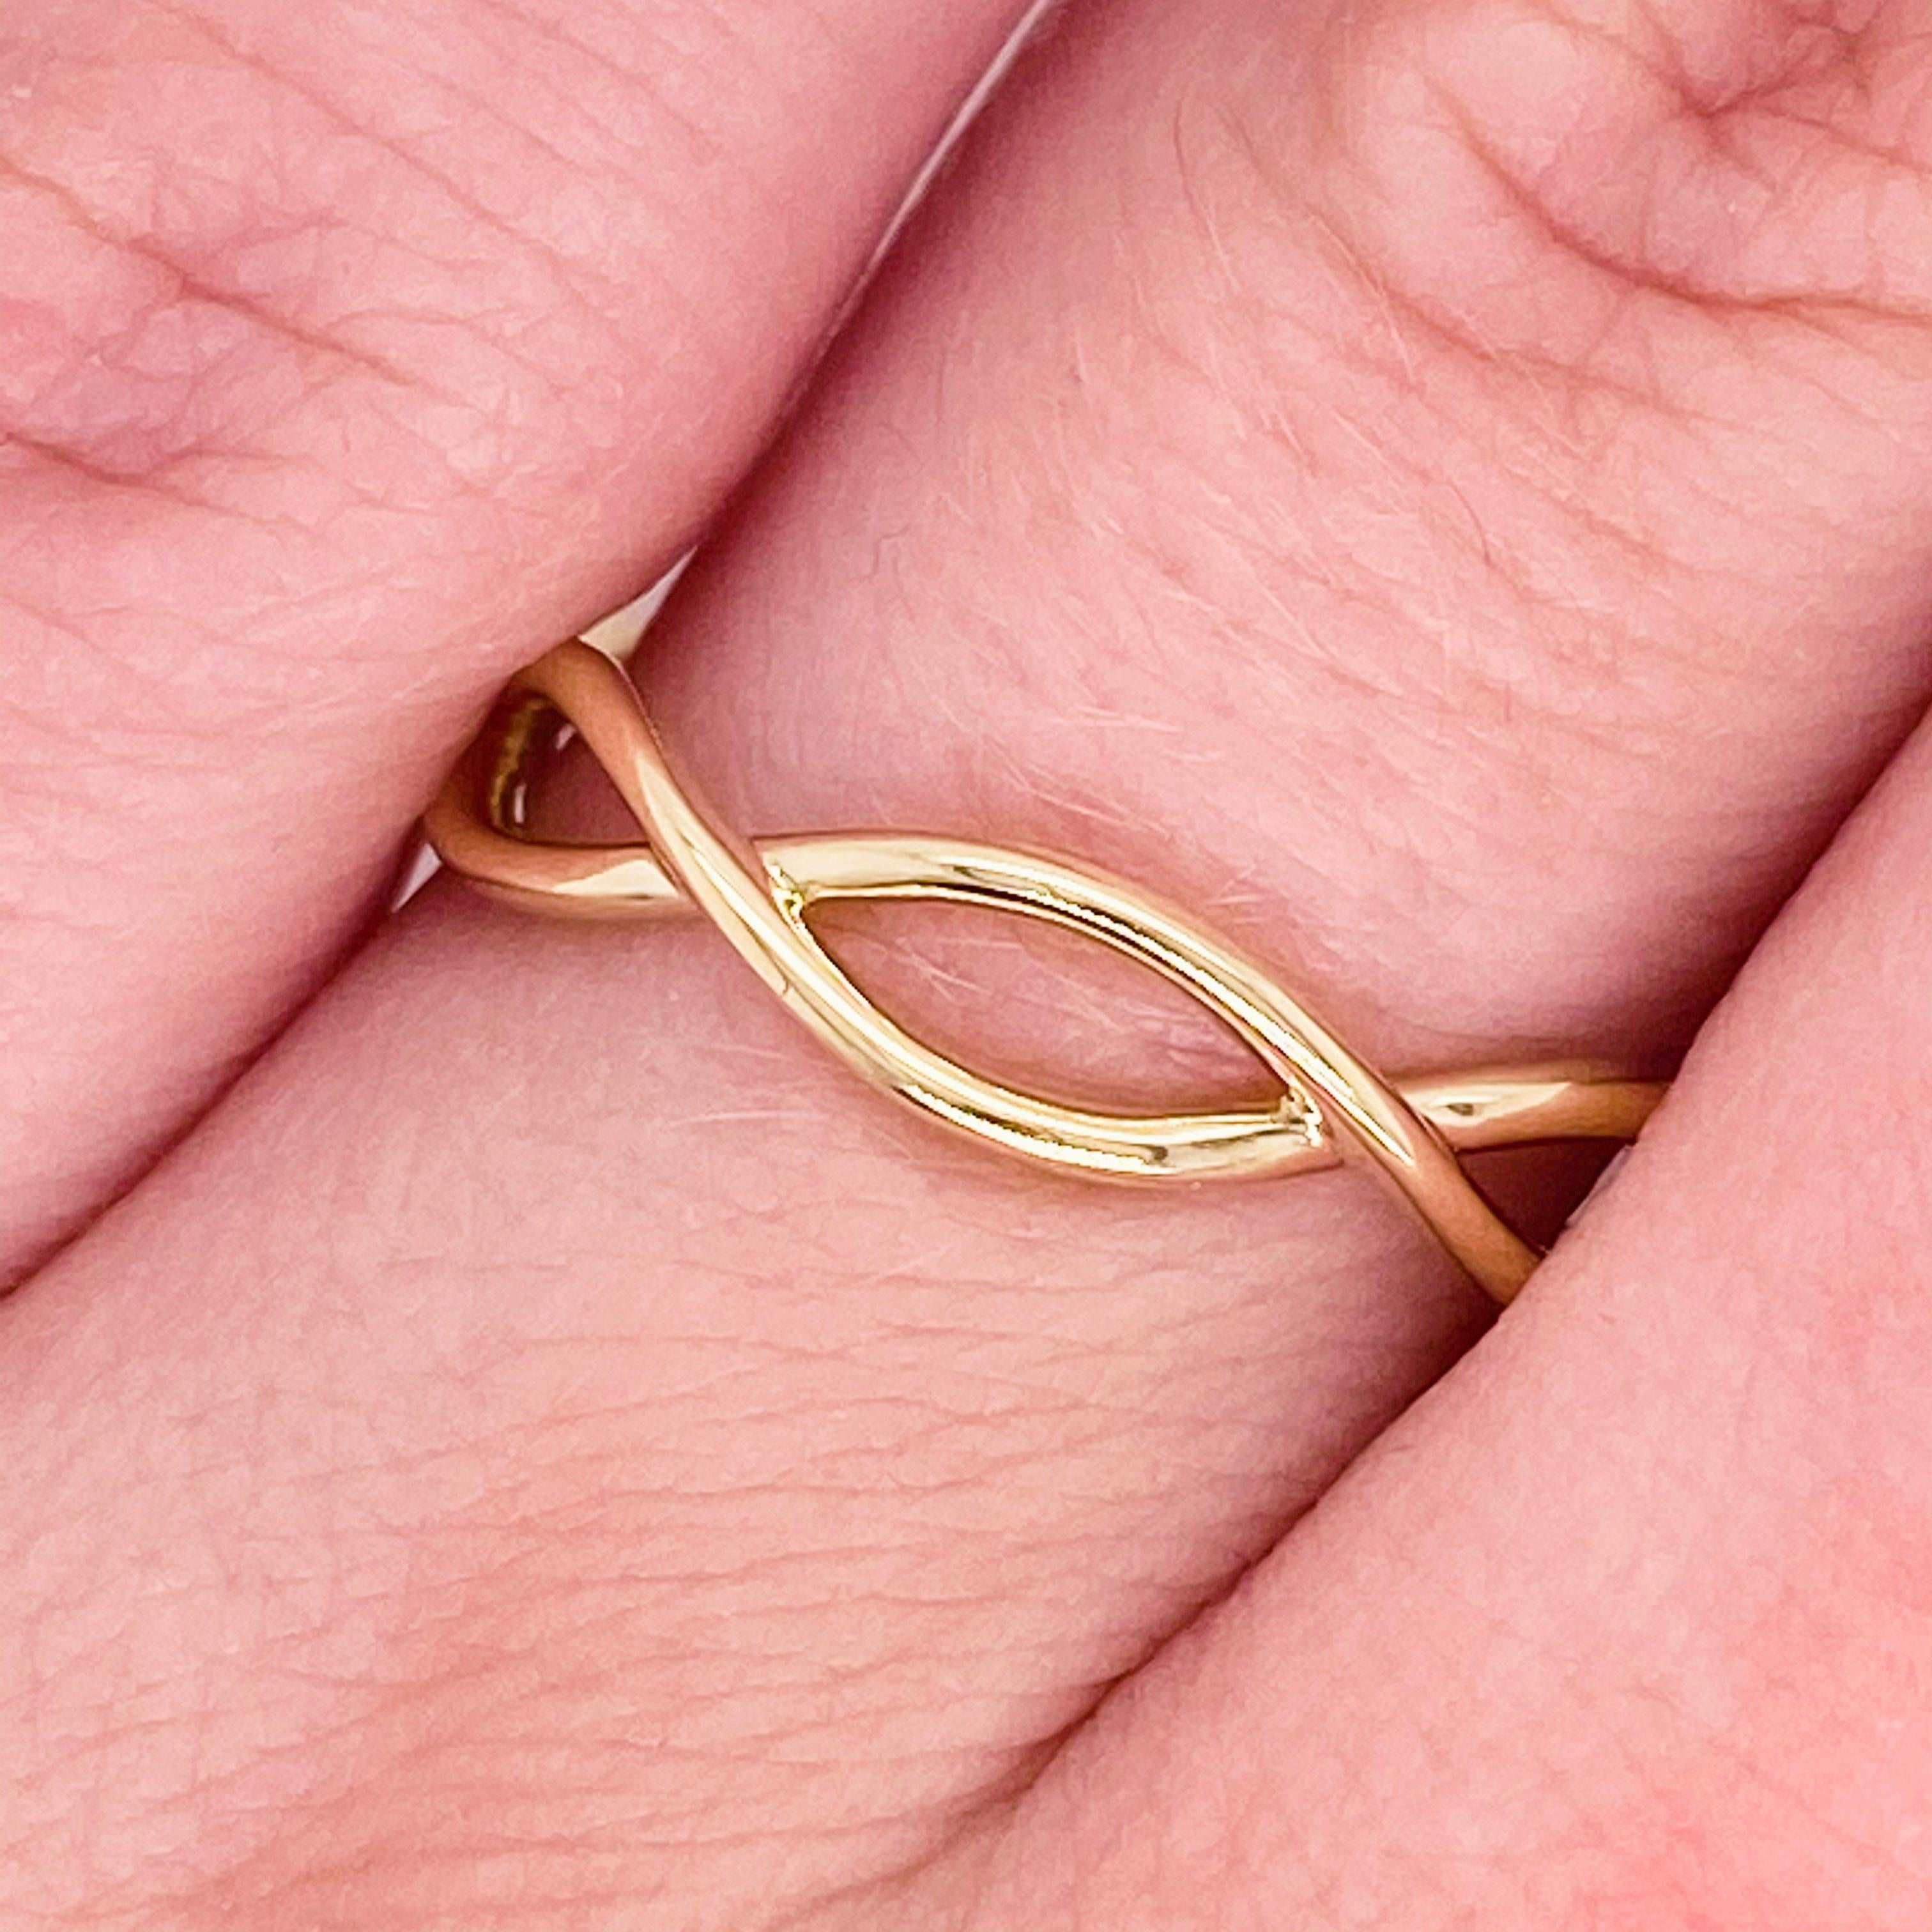 This lovely band has a beautiful twisted design! Accented by the lovely 14 karat yellow gold, this ring is an amazing fashion band and stackable band!  This pairs well with most engagement rings and wedding bands as well!  Treat yourself or your